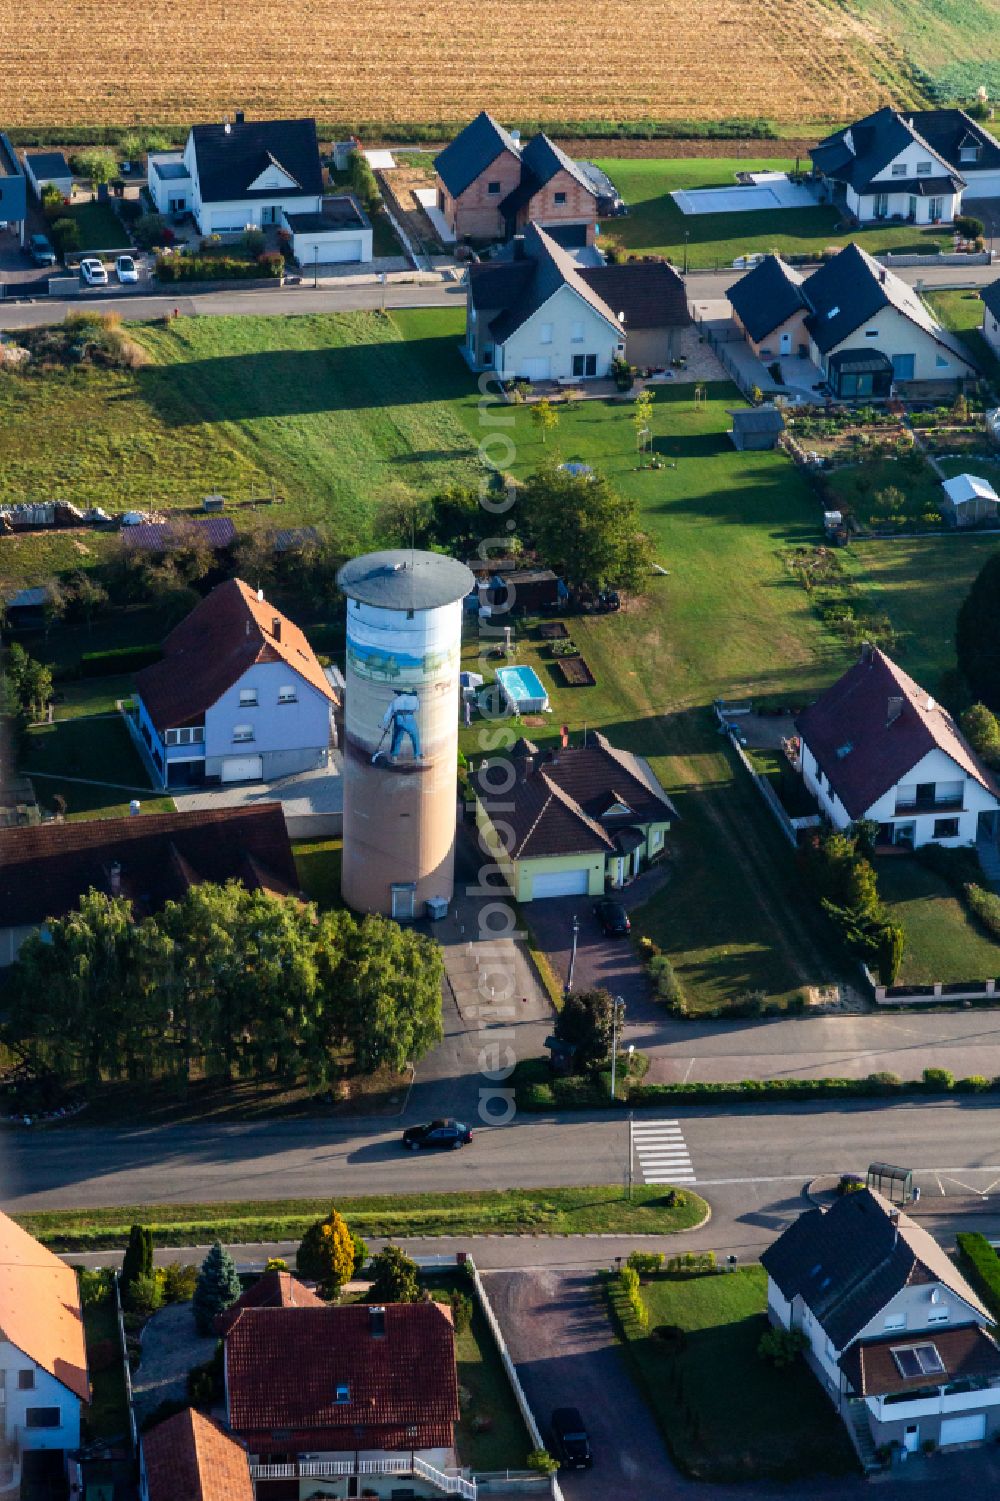 Schoenenbourg from the bird's eye view: Building of decorated water tower in Schoenenbourg in Grand Est, France